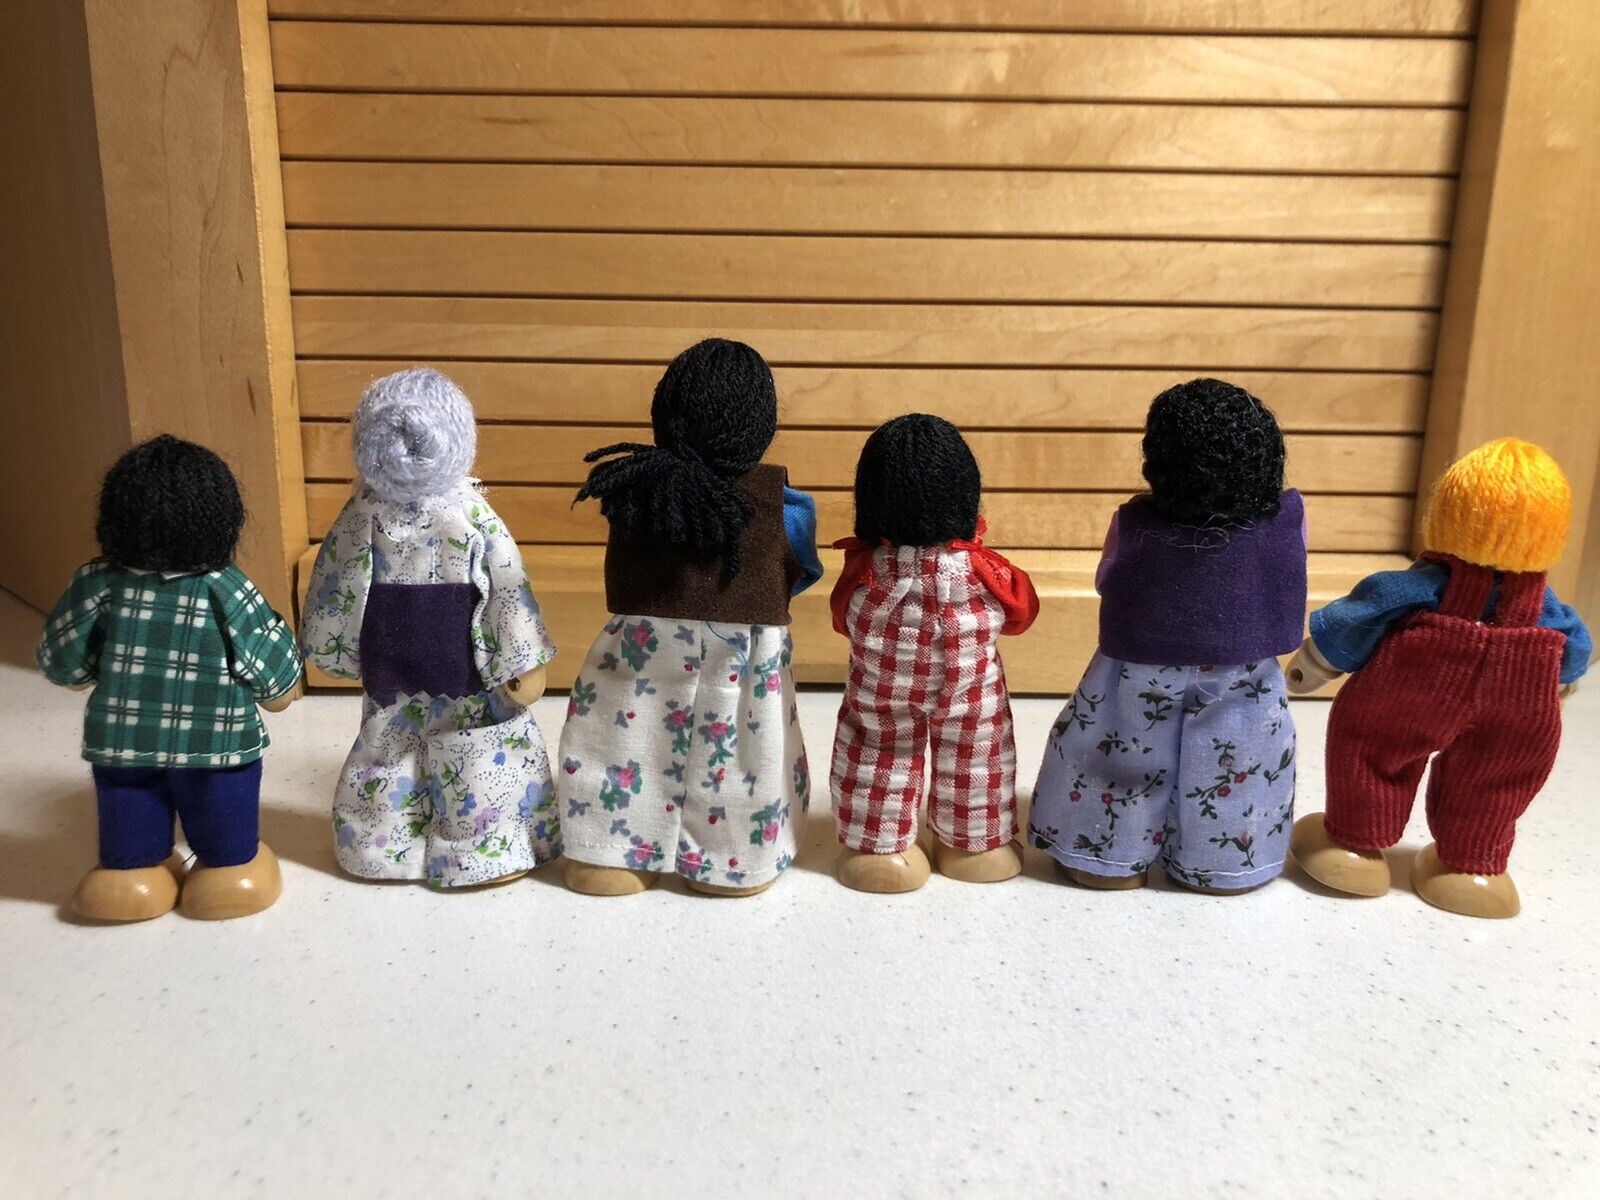 2002 The Children's Group Inc. Wooden-Poseable Doll Set-Fabric Clothes-Dollhouse